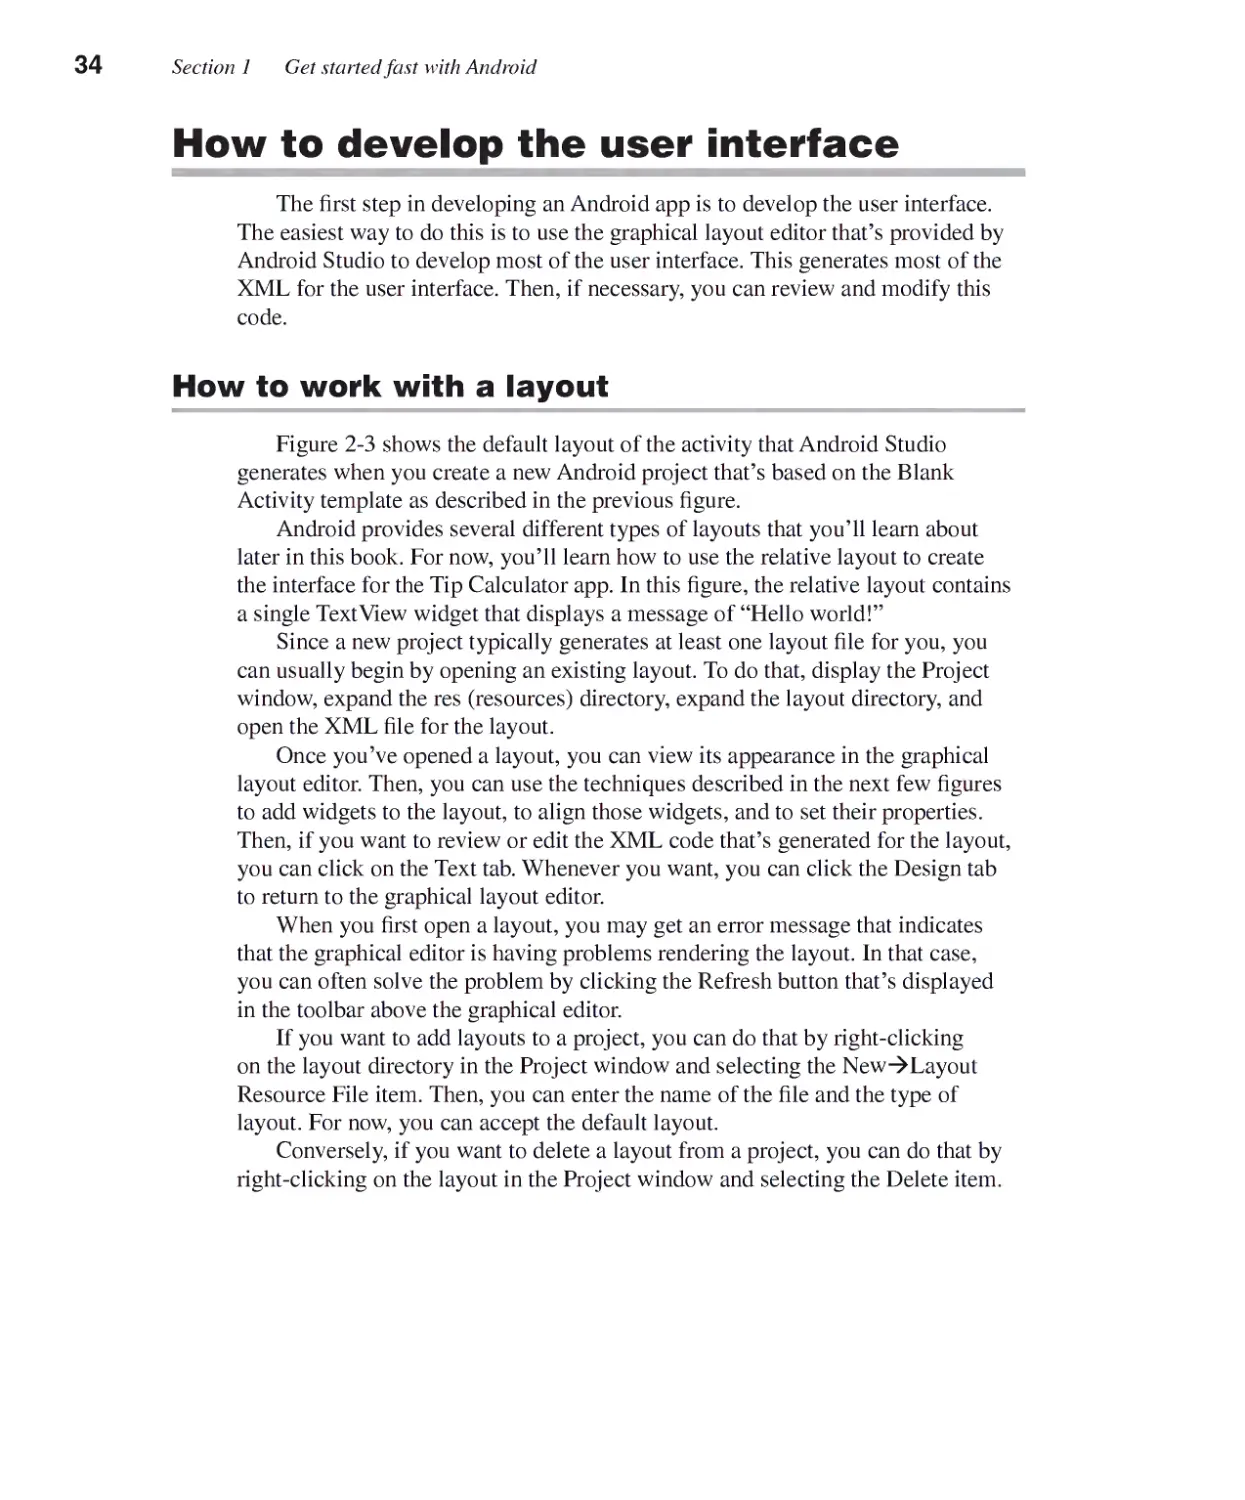 How to Develop the User Interface